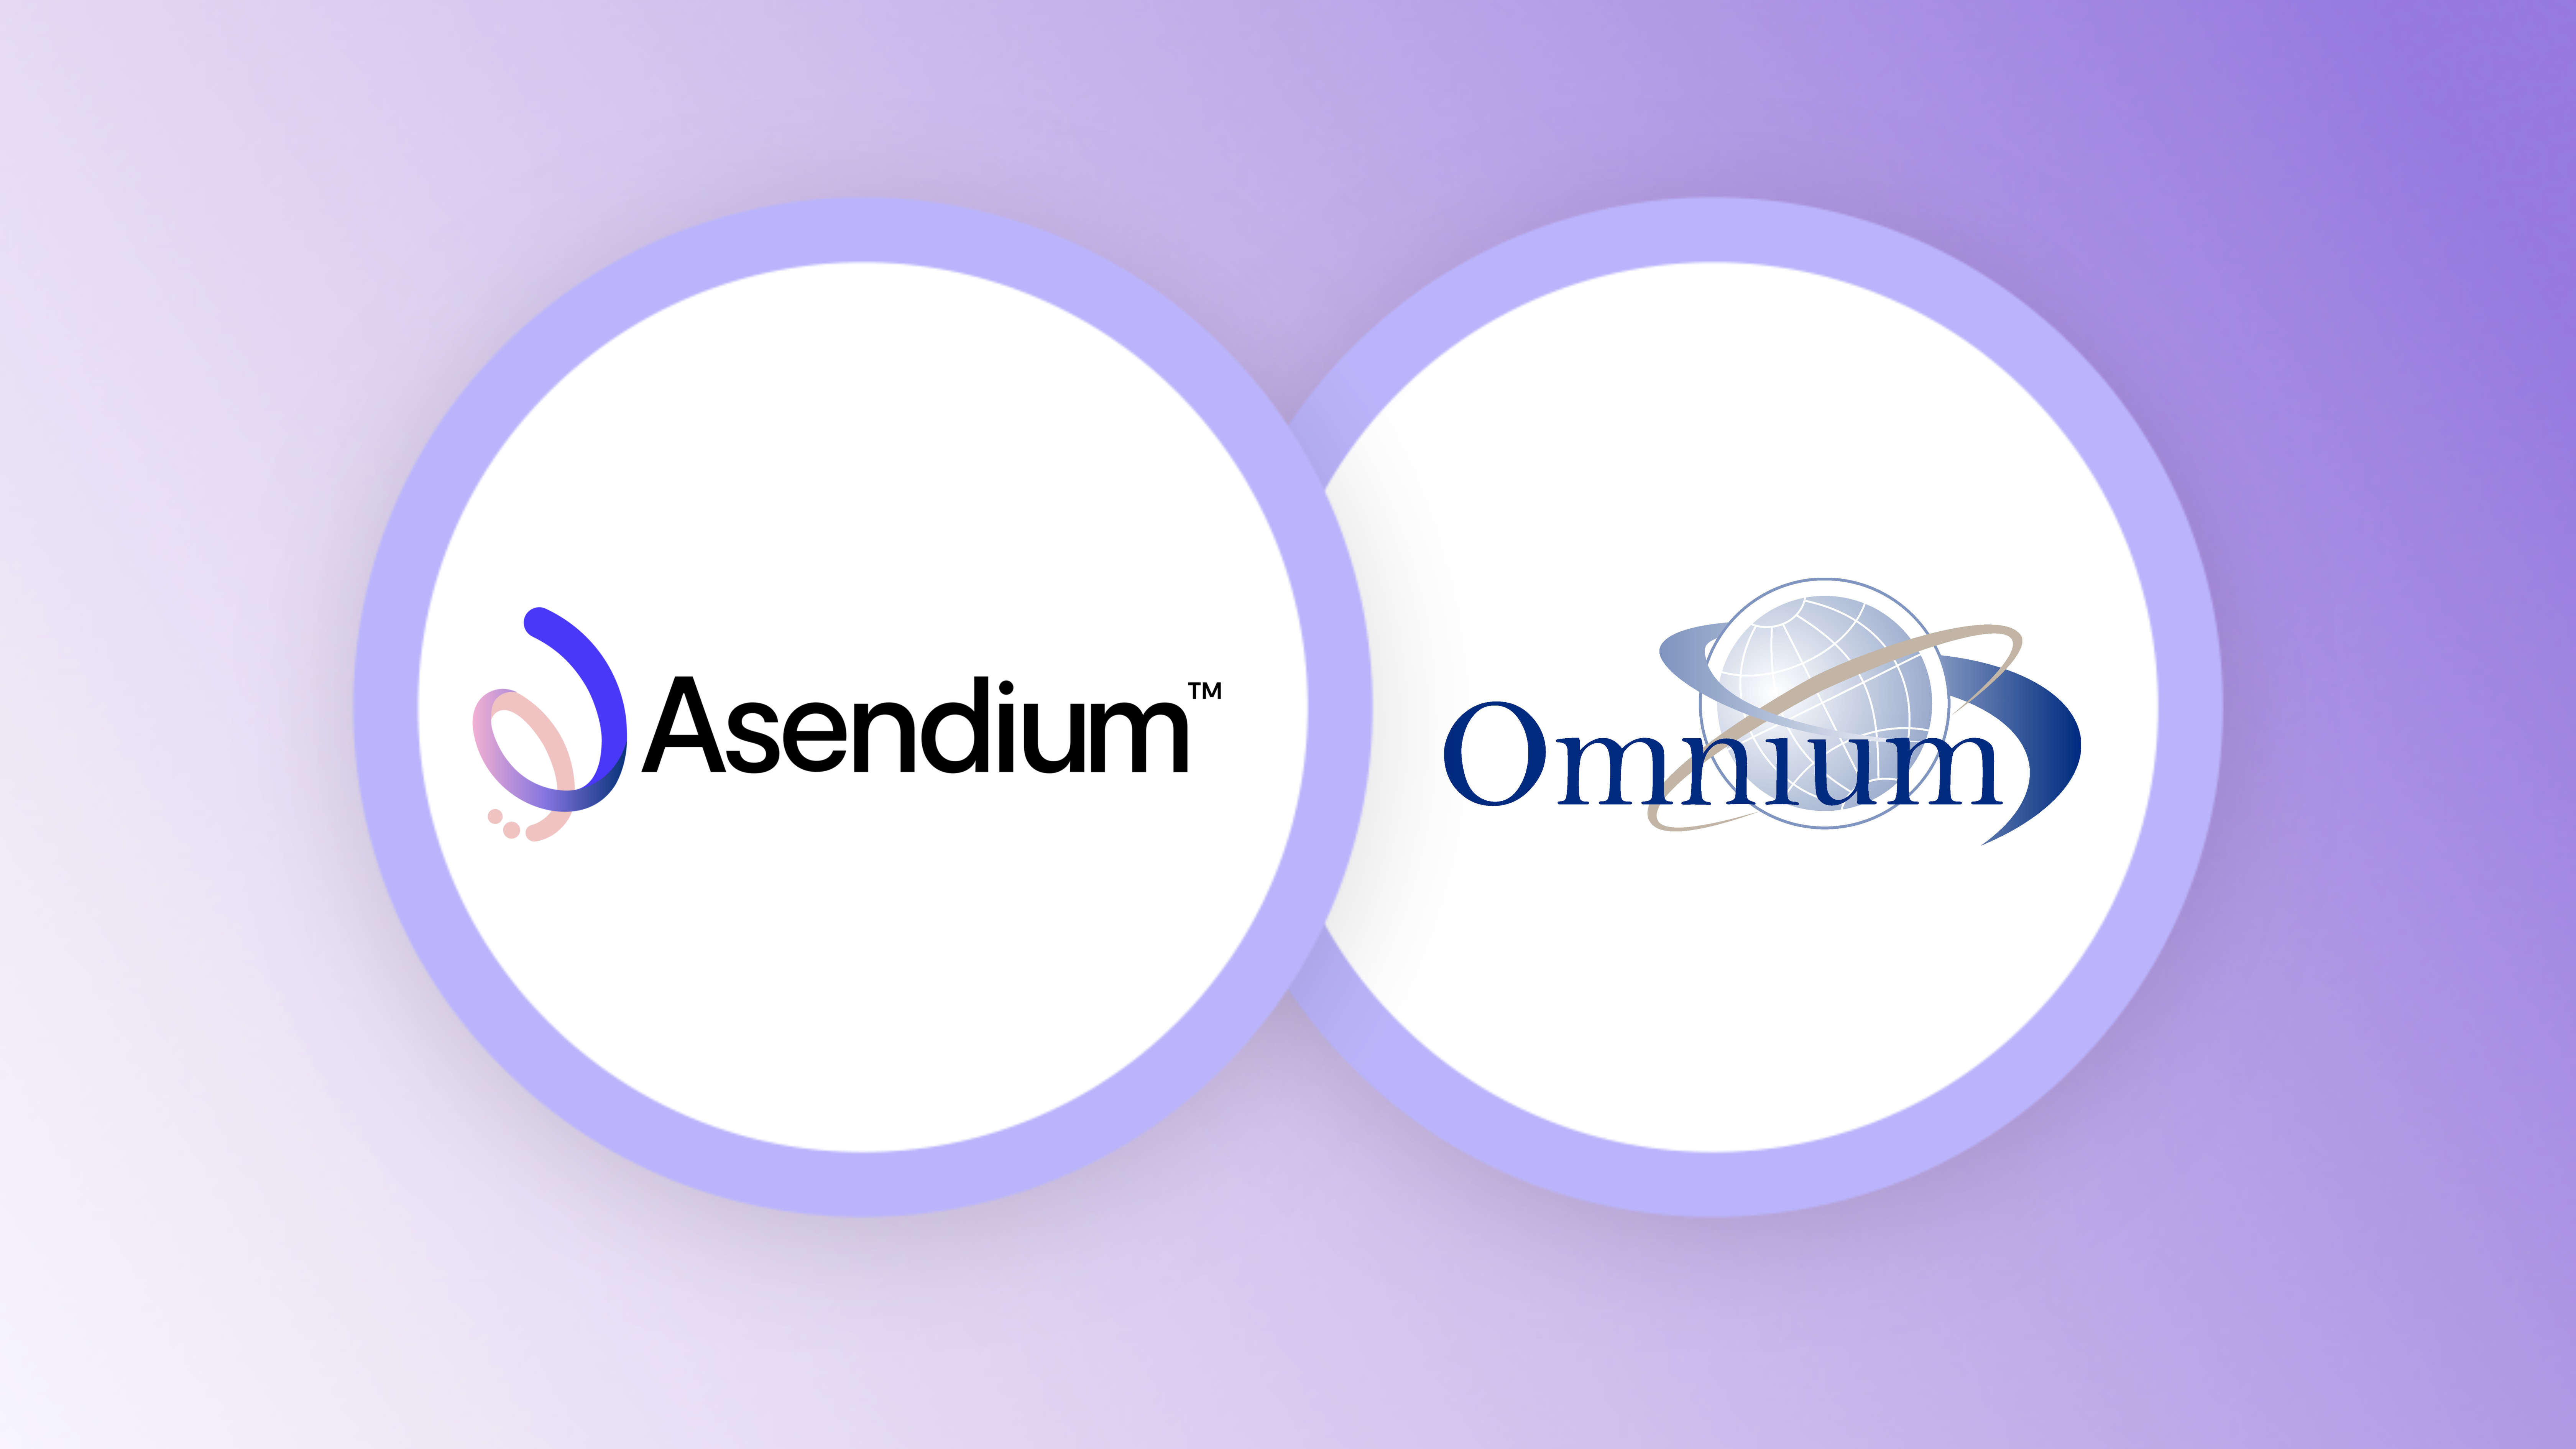 Graphic depicting both Asendium's and Omnium's logos side by side.